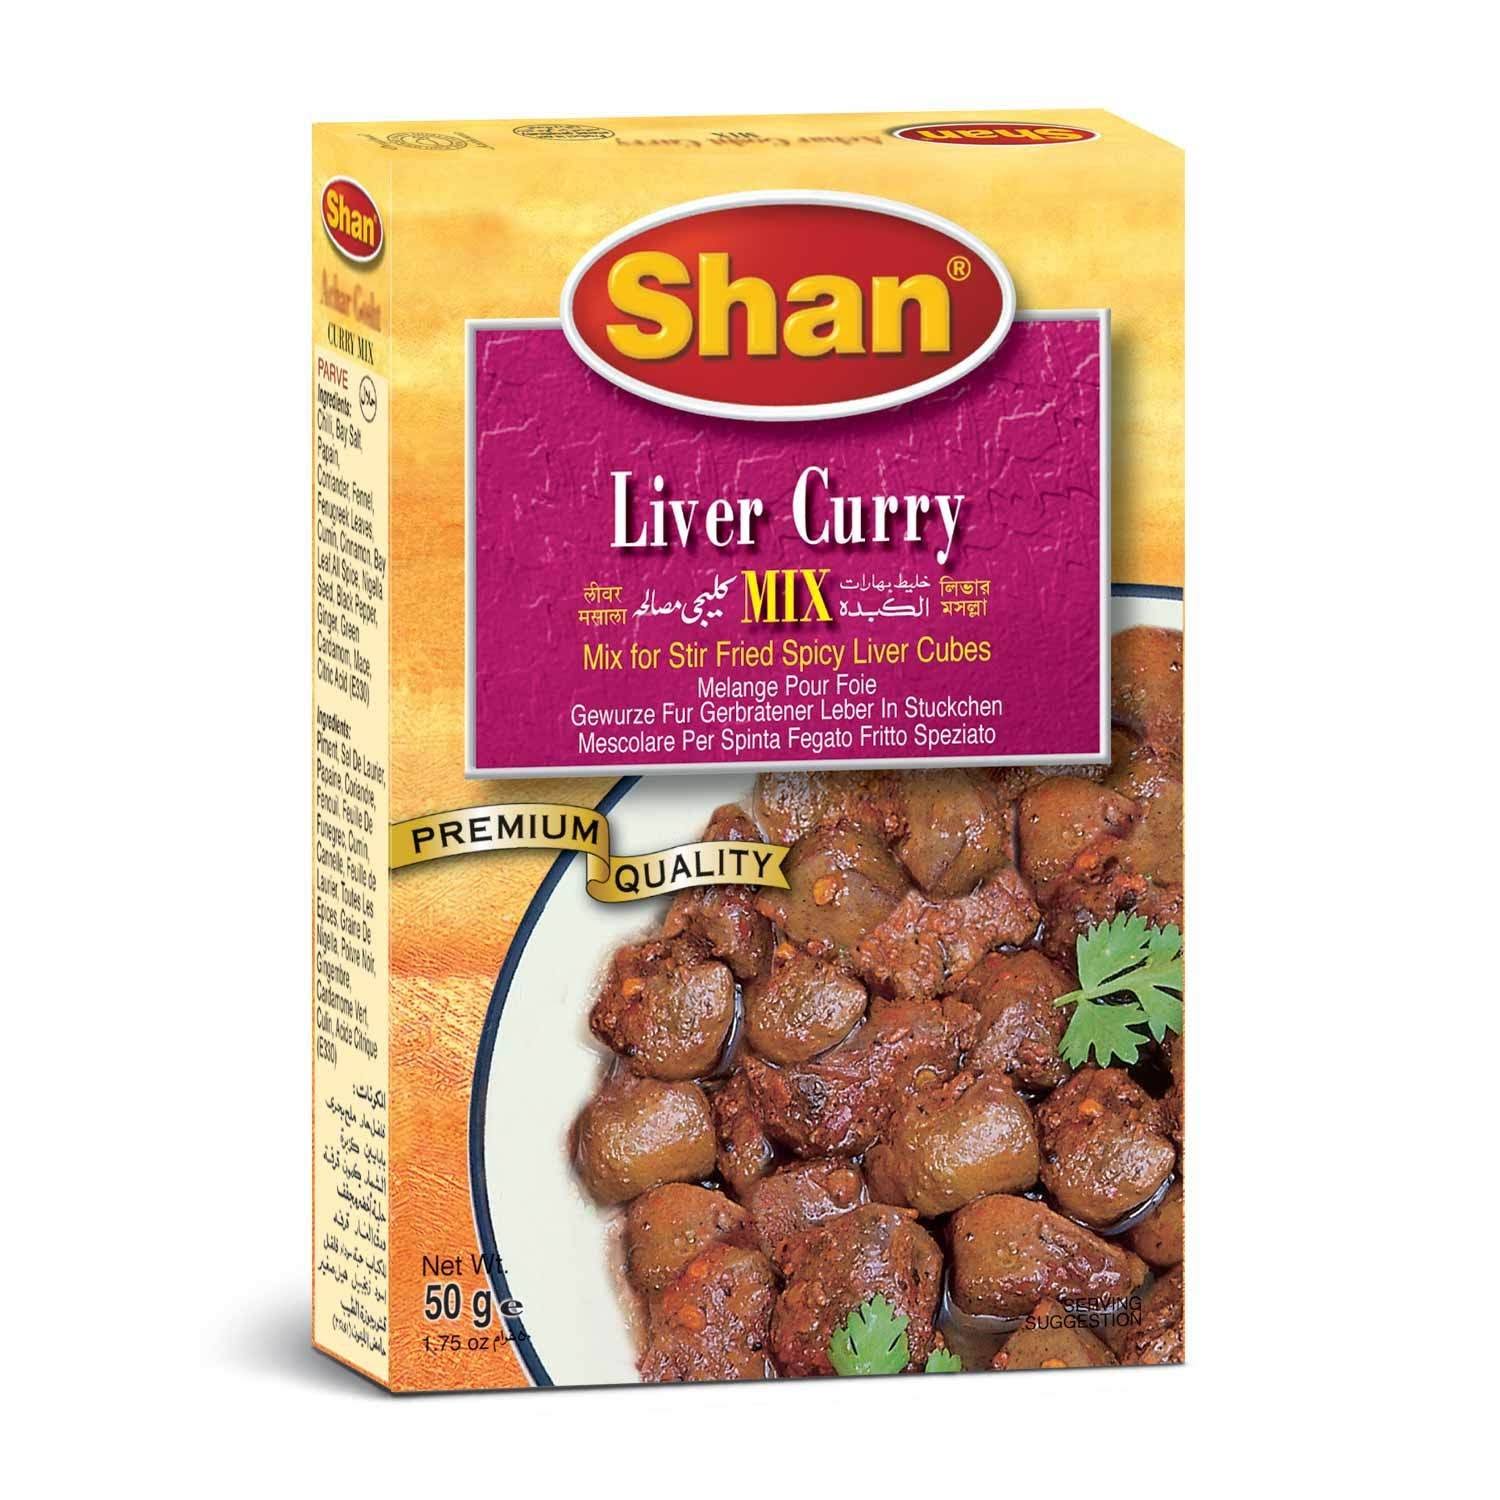 Shan Liver Curry Mix 50g Pack